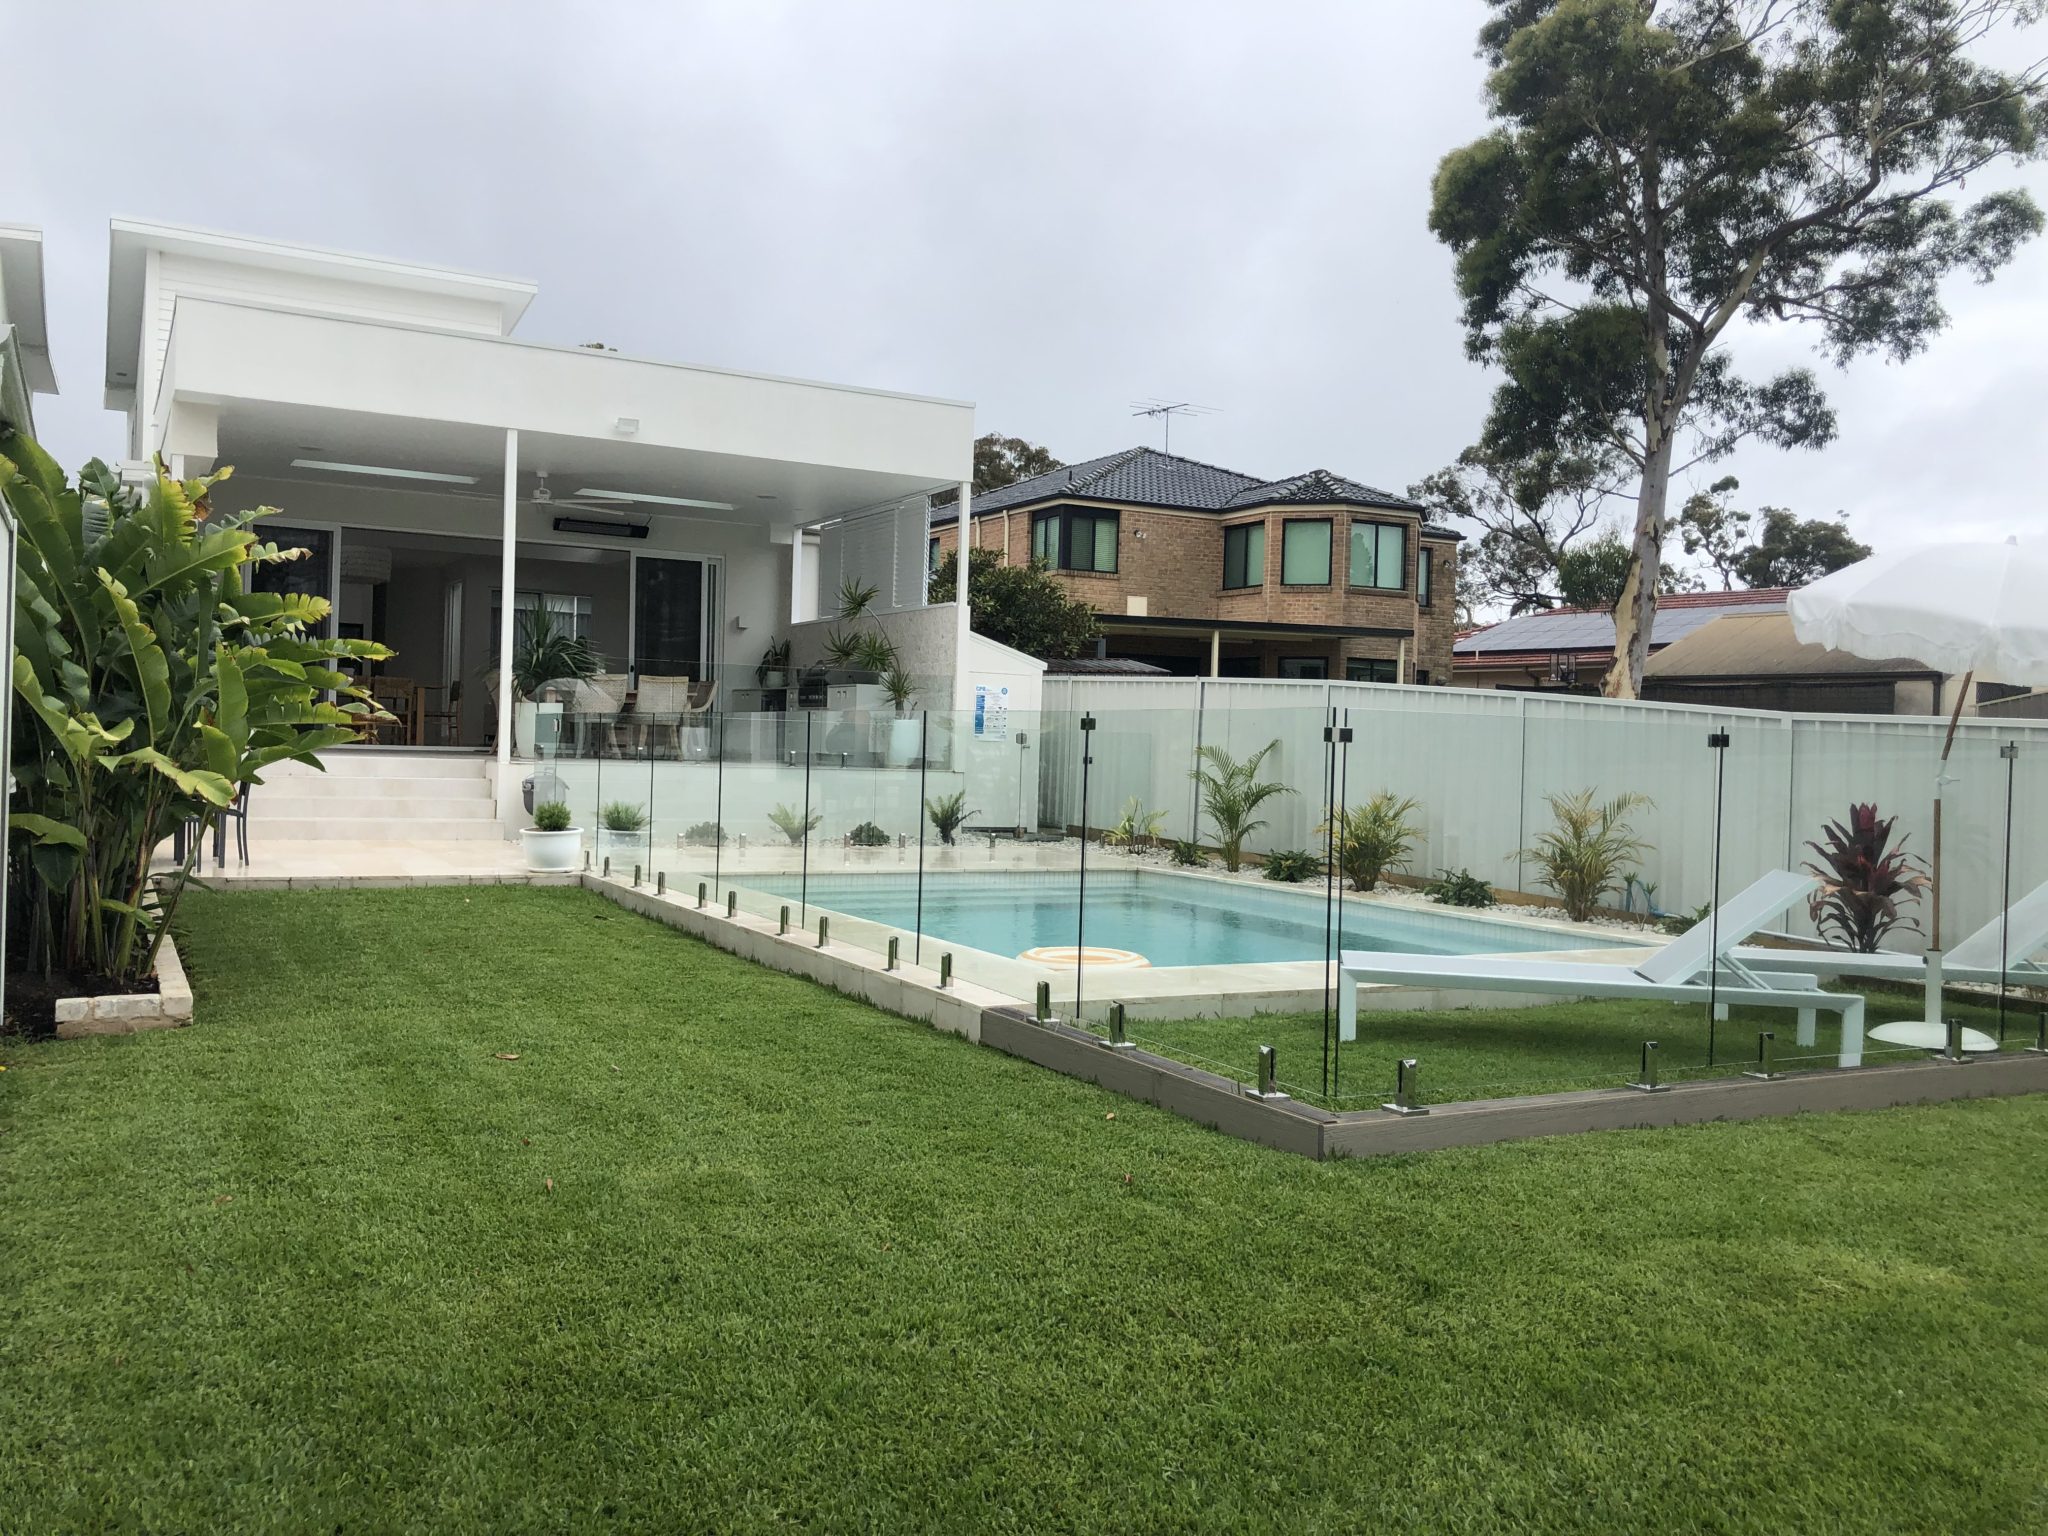 Caringbah Sth Modern Coastal Light Filled Entertainers Home